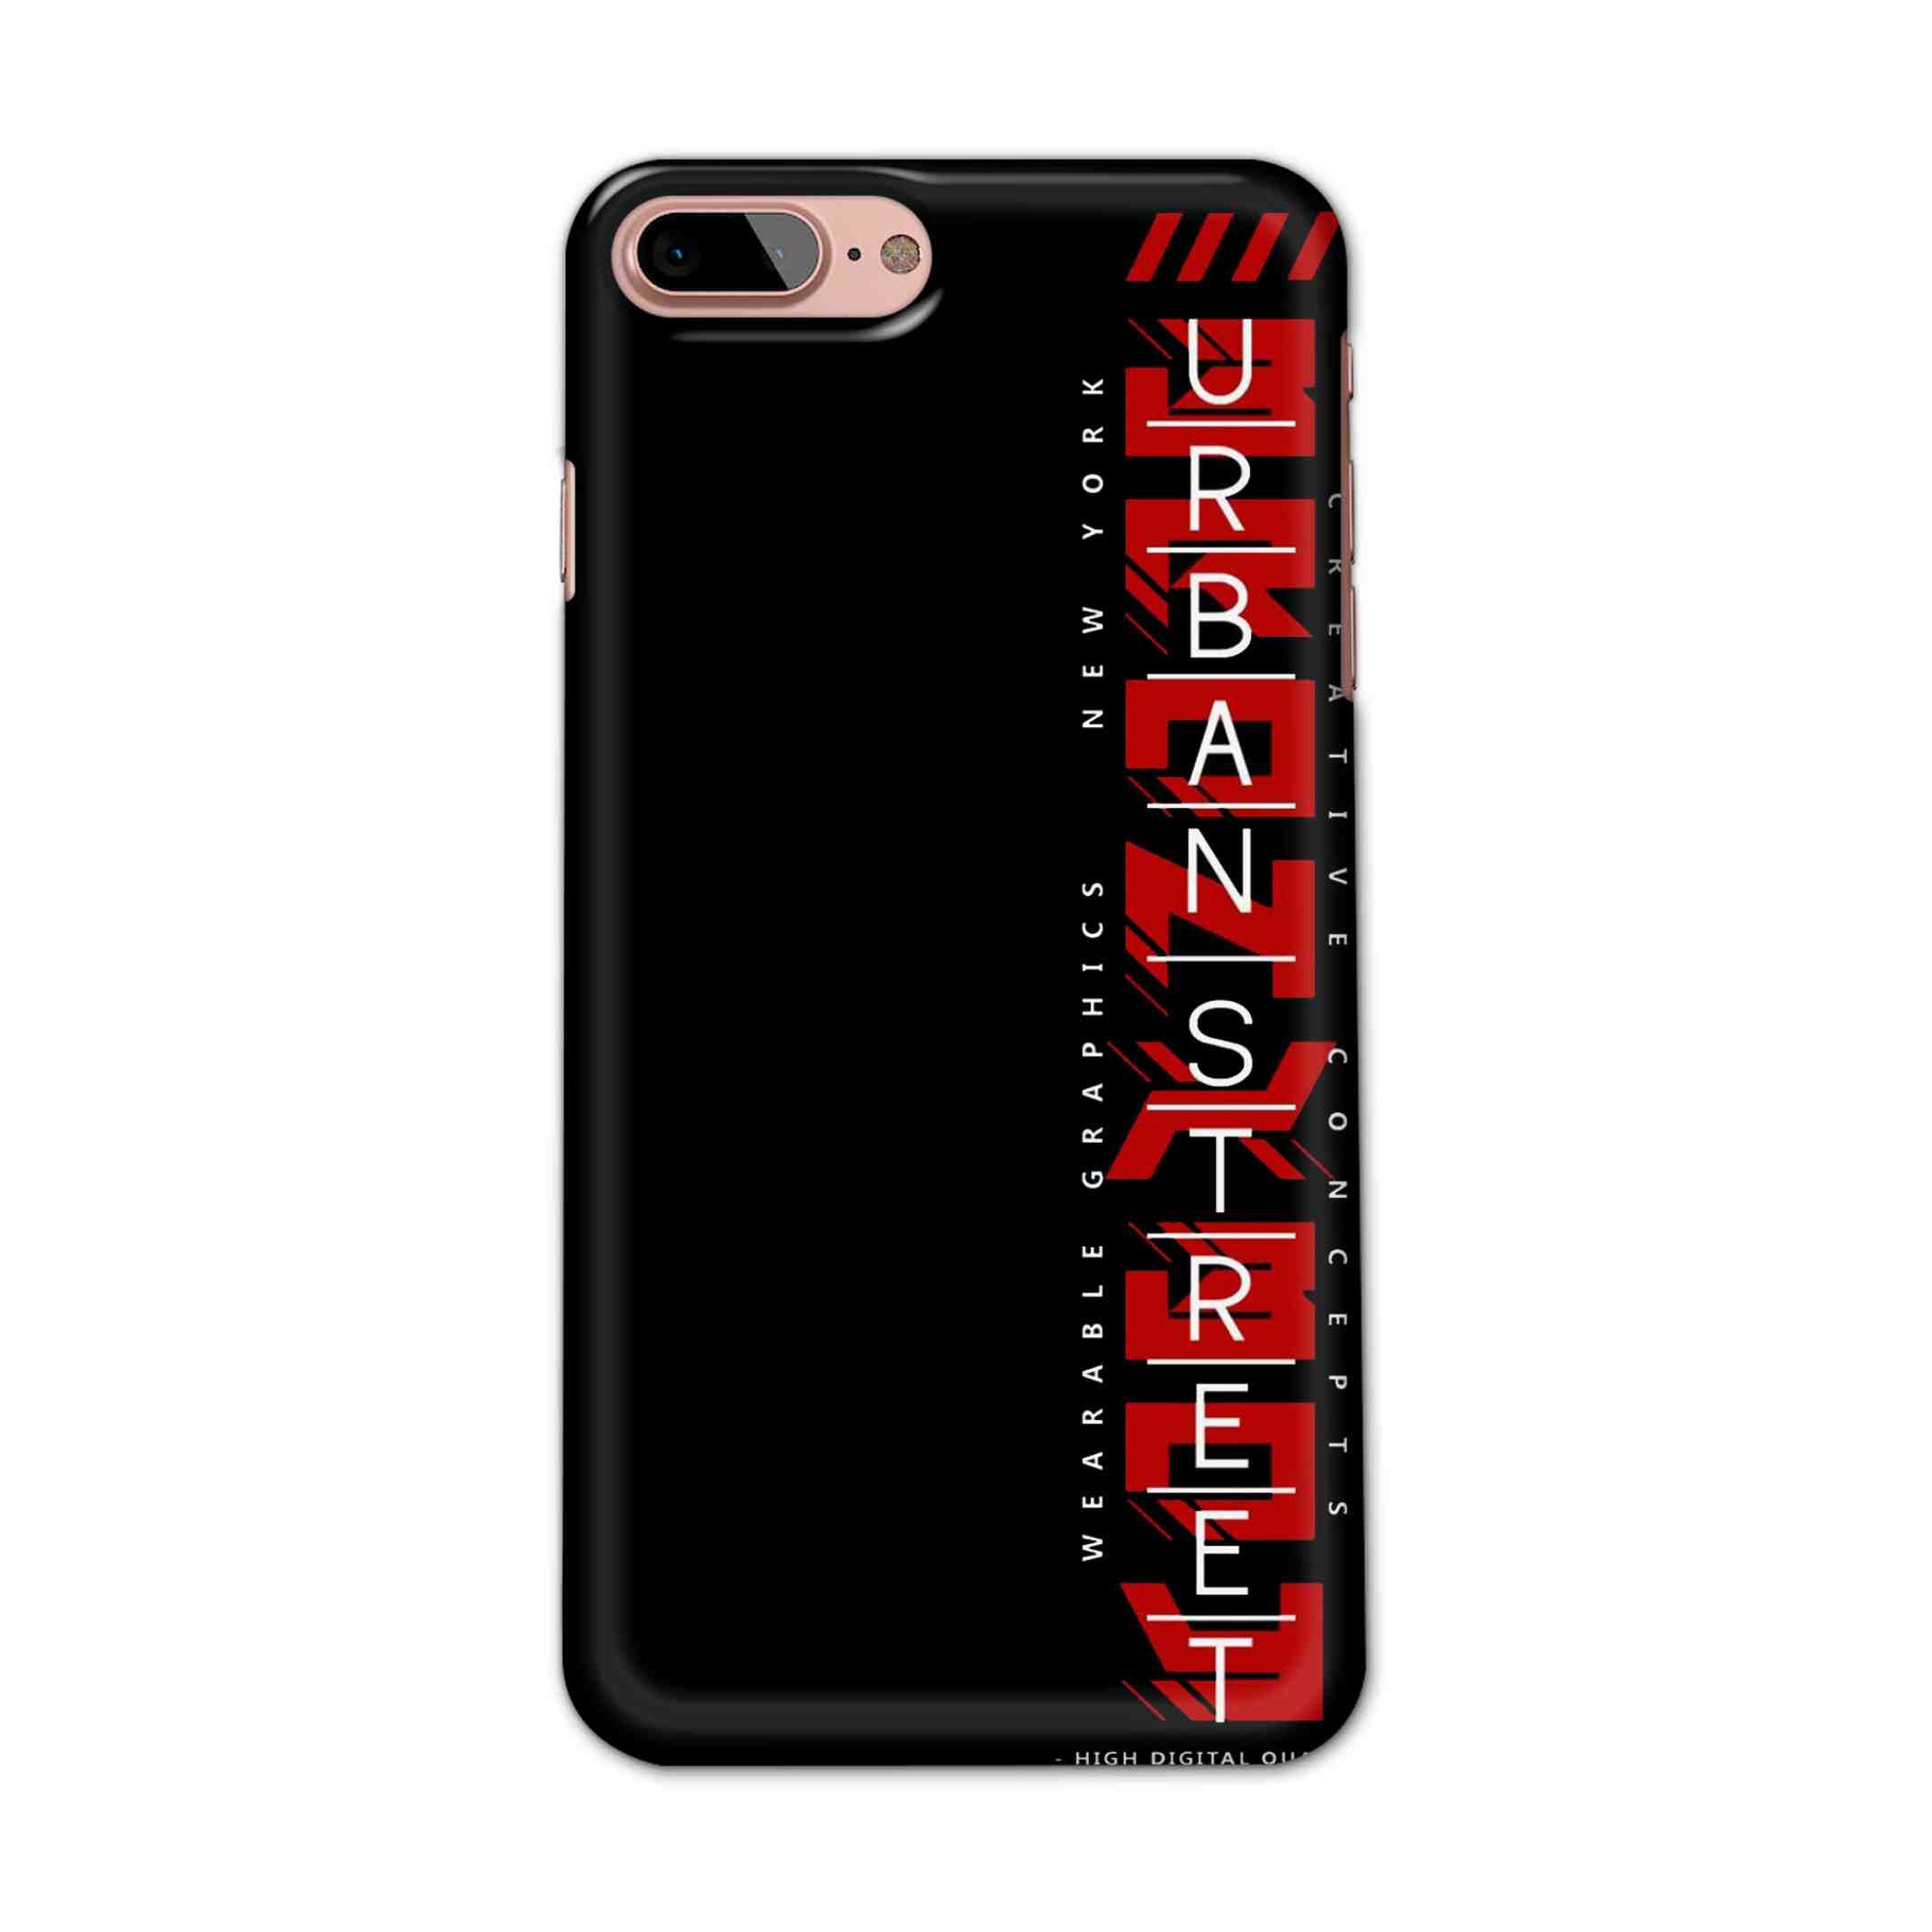 Buy Urban Street Hard Back Mobile Phone Case/Cover For iPhone 7 Plus / 8 Plus Online